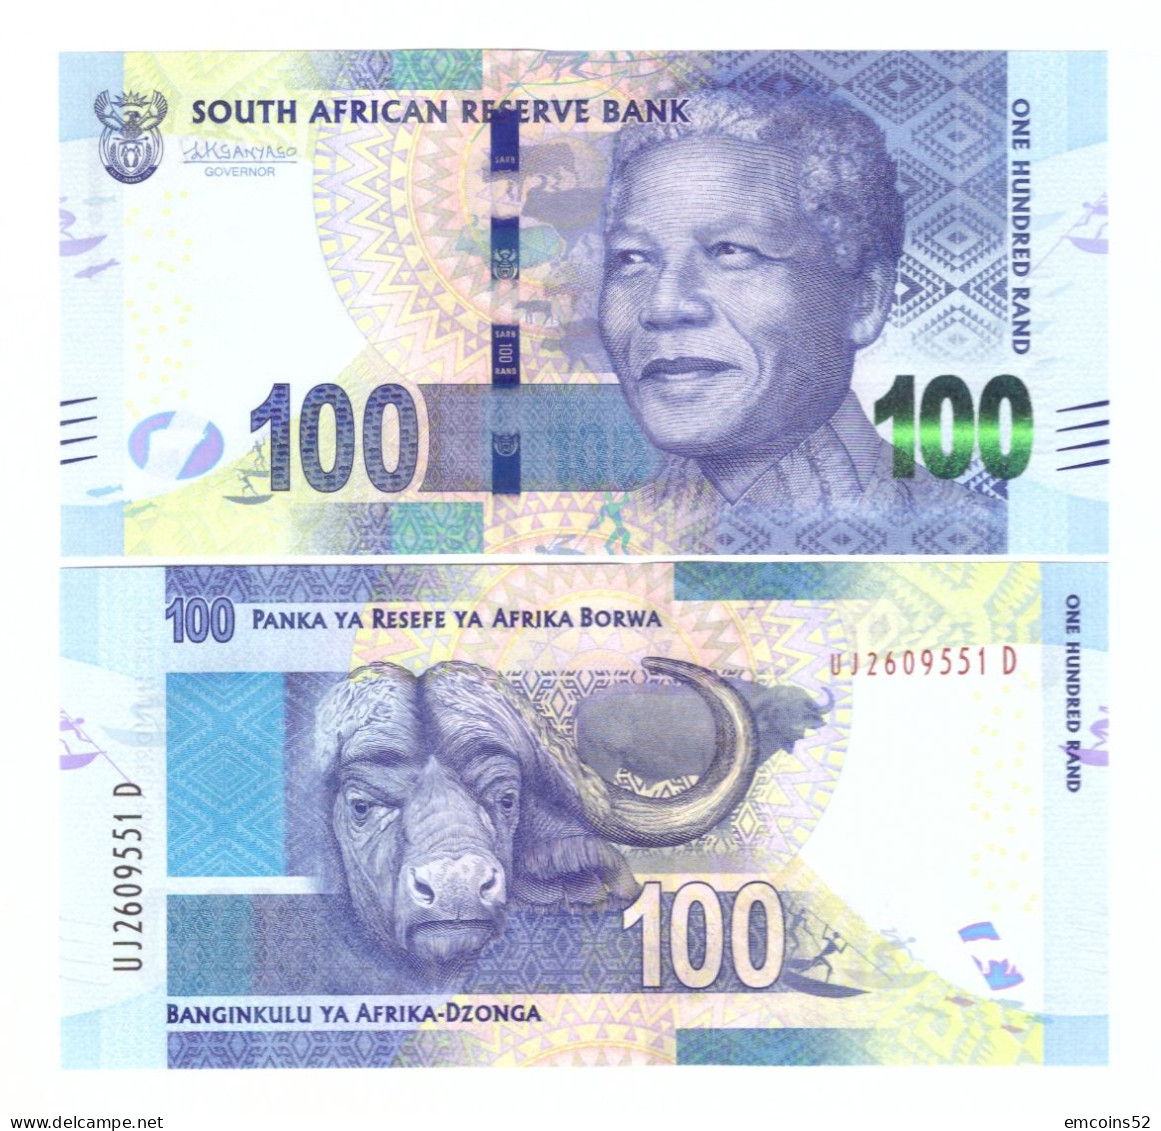 SOUTH AFRICA 100 RAND ND/2013/2016 P-141b UNC - South Africa